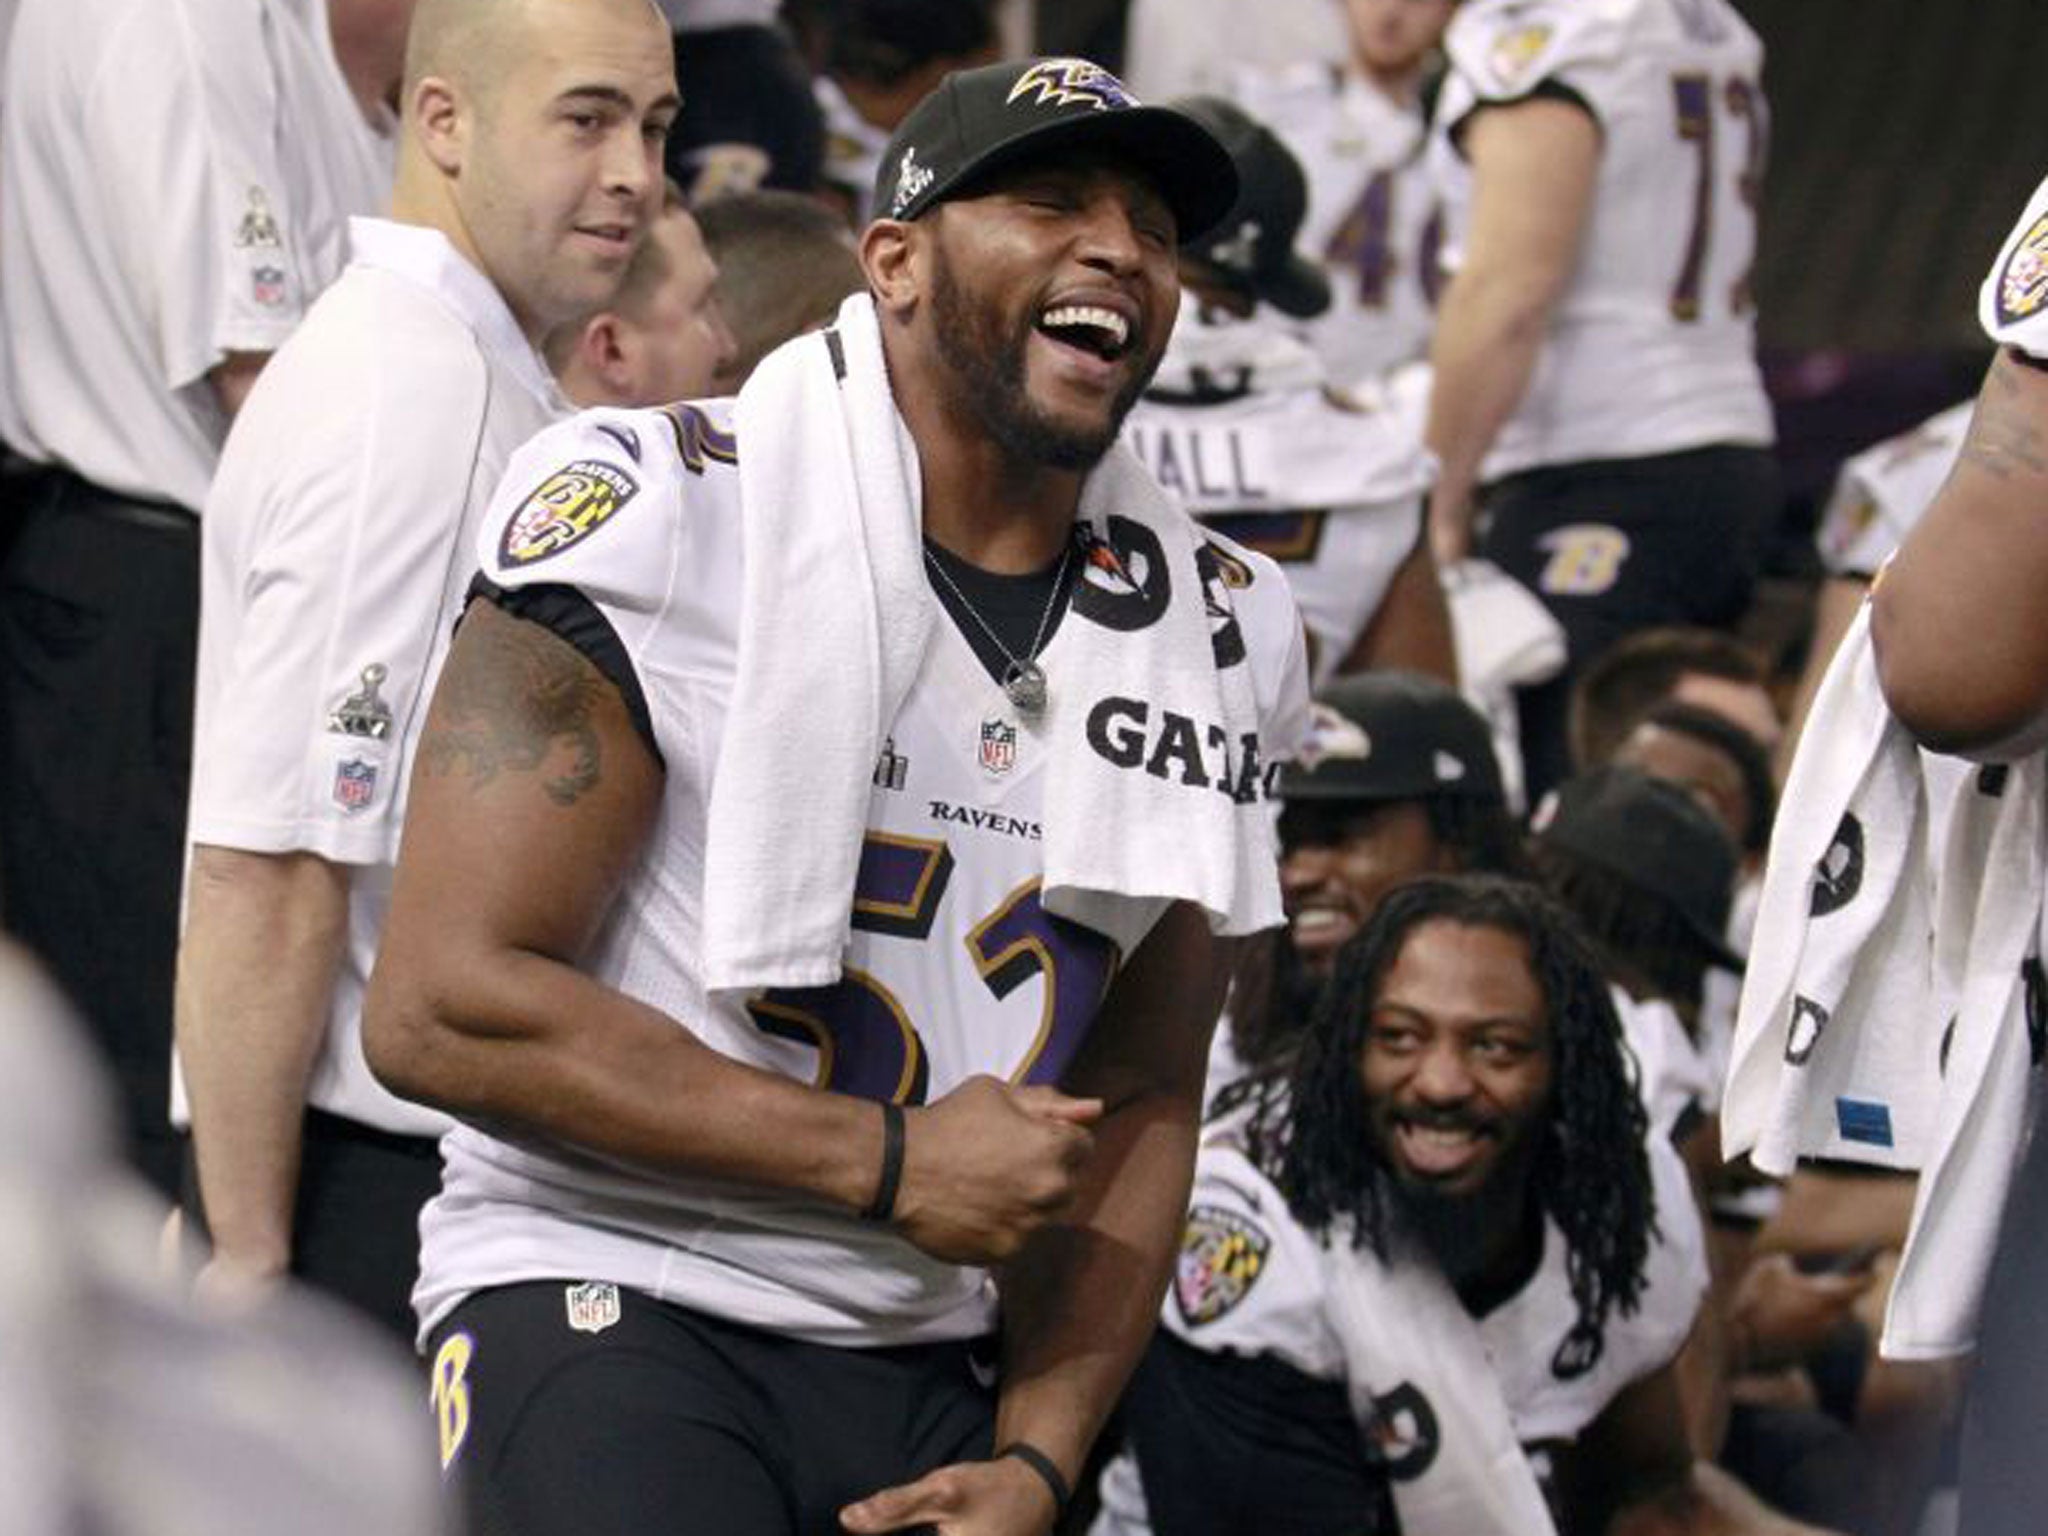 American football: Controversial Ray Lewis seeks to bow out as